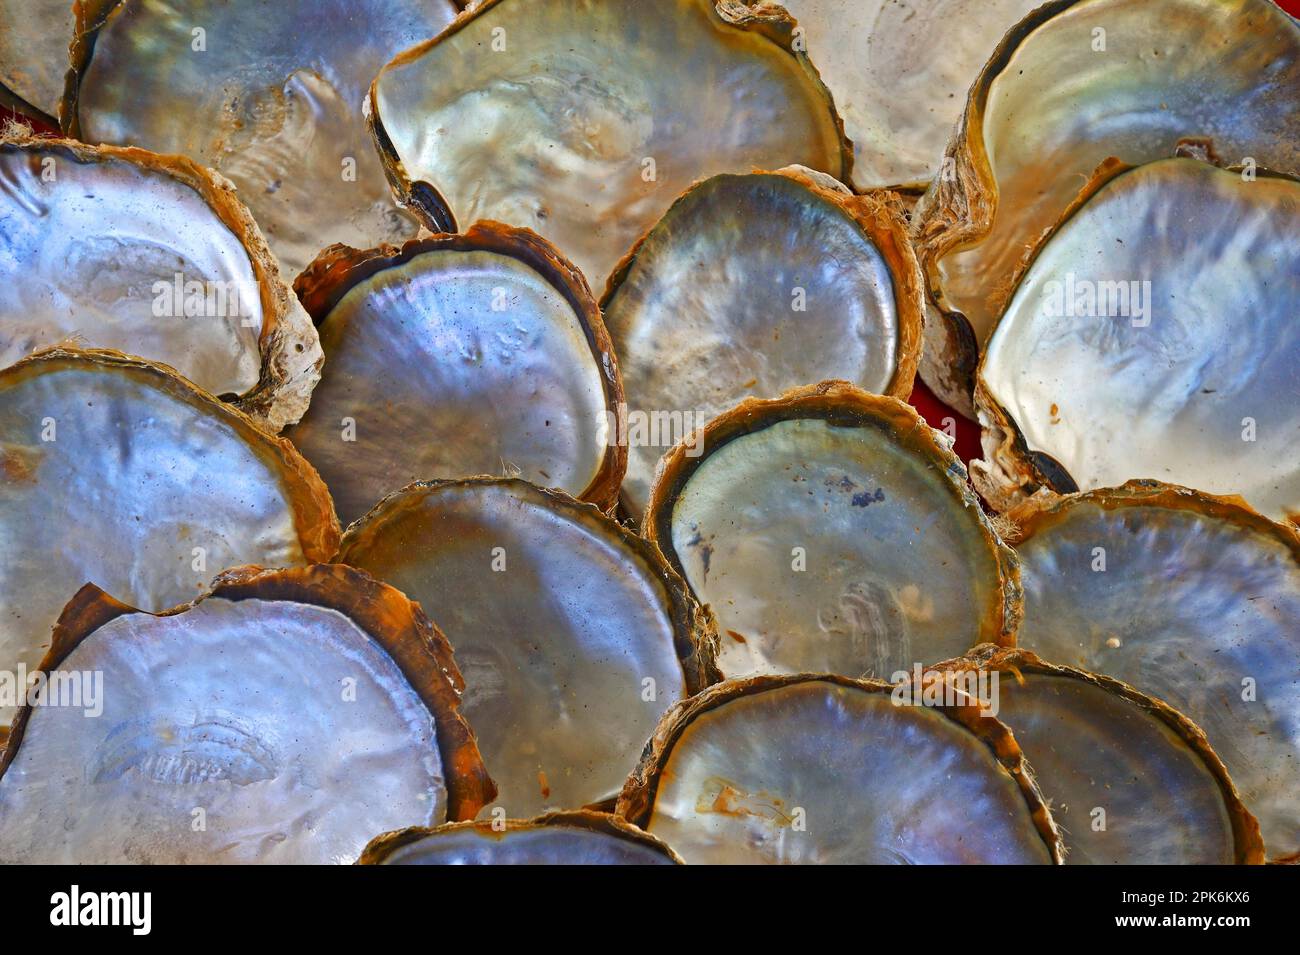 Shells of pearl oysters with mother-of-pearl on the inside of the shell, Praslin Island, Seychelles Stock Photo